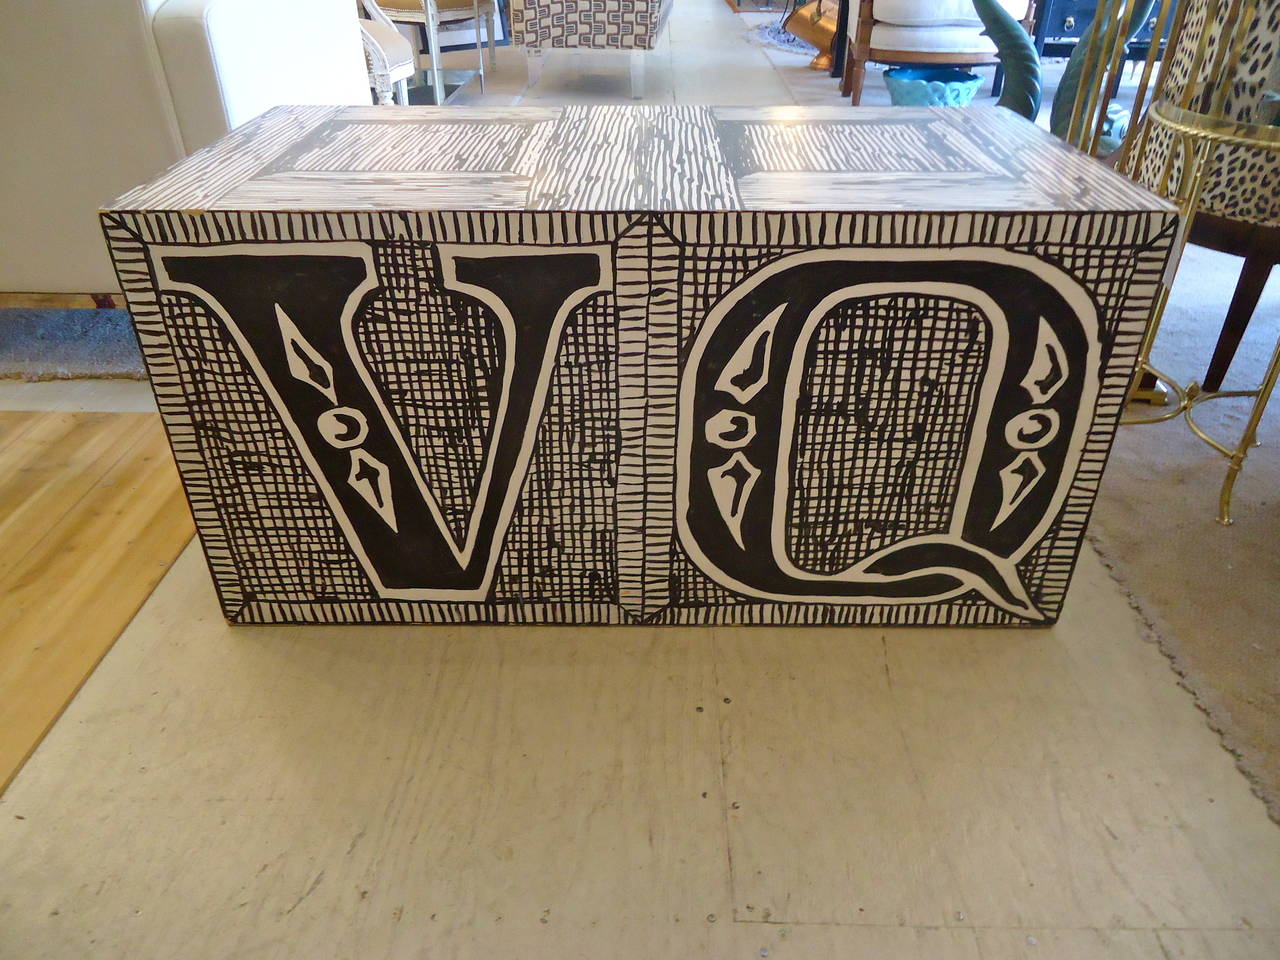 Cult figure and renowned illustrator, writer and artist Edward Gorey, 1925-2000.
Created this trio of black and white graphically painted wooden cubes. Two single cubes are 20 x 20 x 20, decorated with the letters R, Q and V. The third piece in the